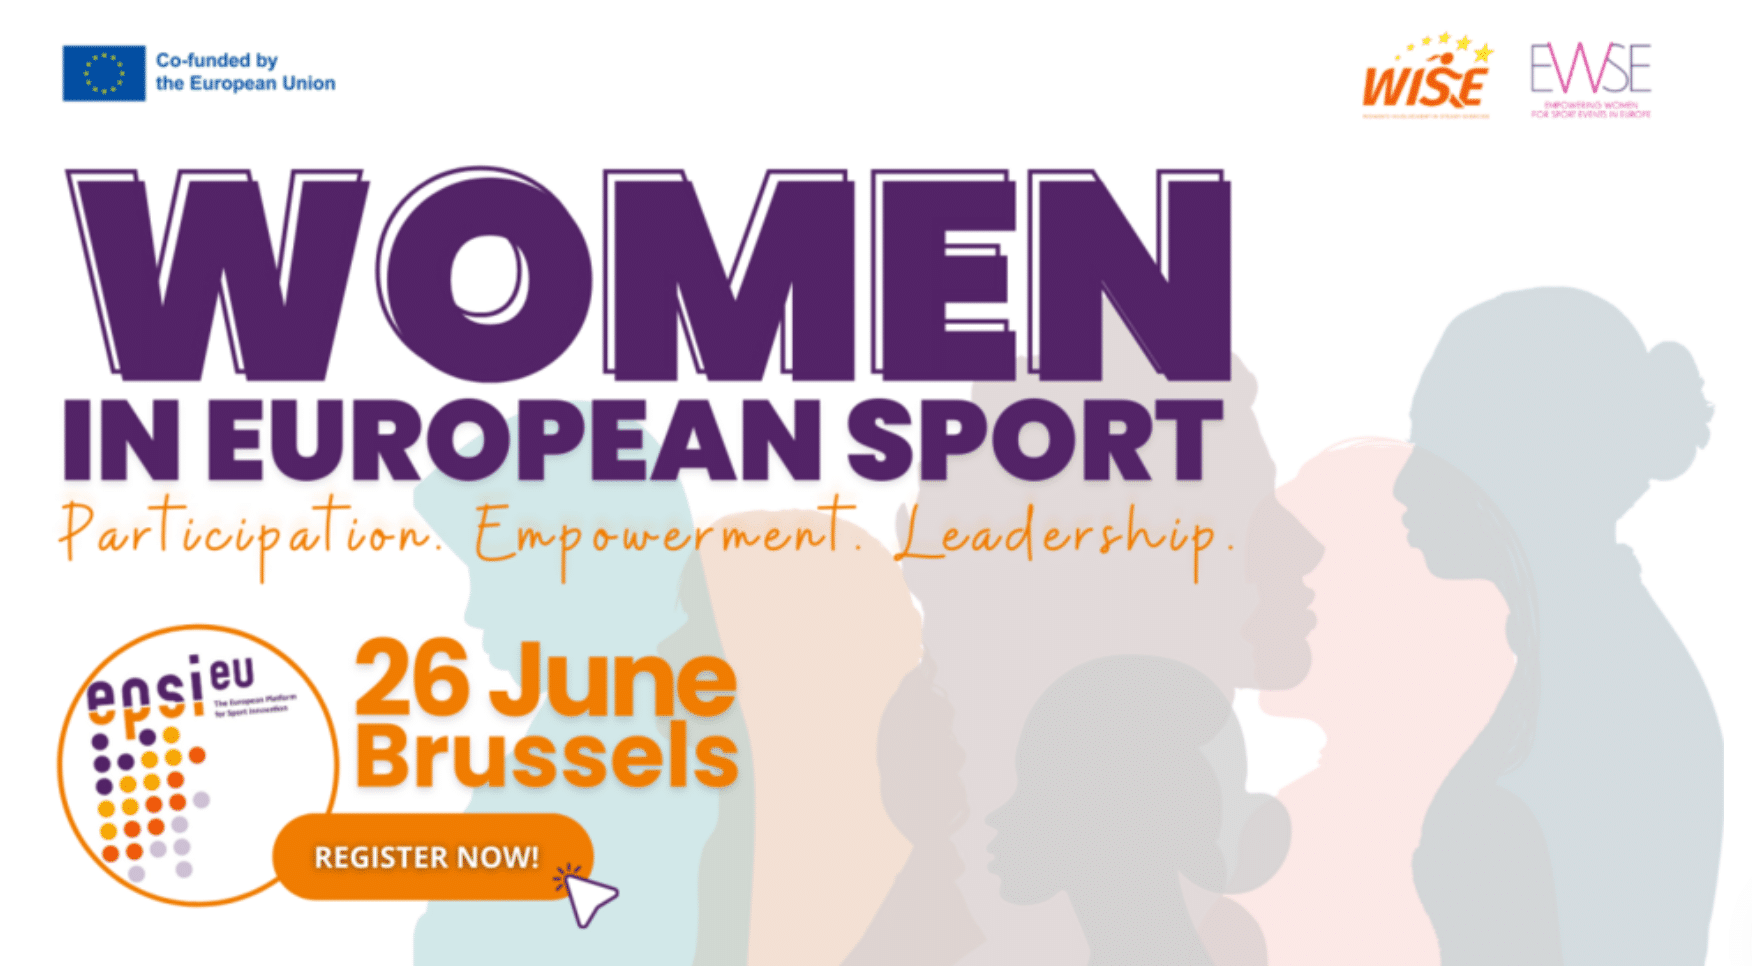 One-day event in Brussels to promote women's empowerment in sports sector